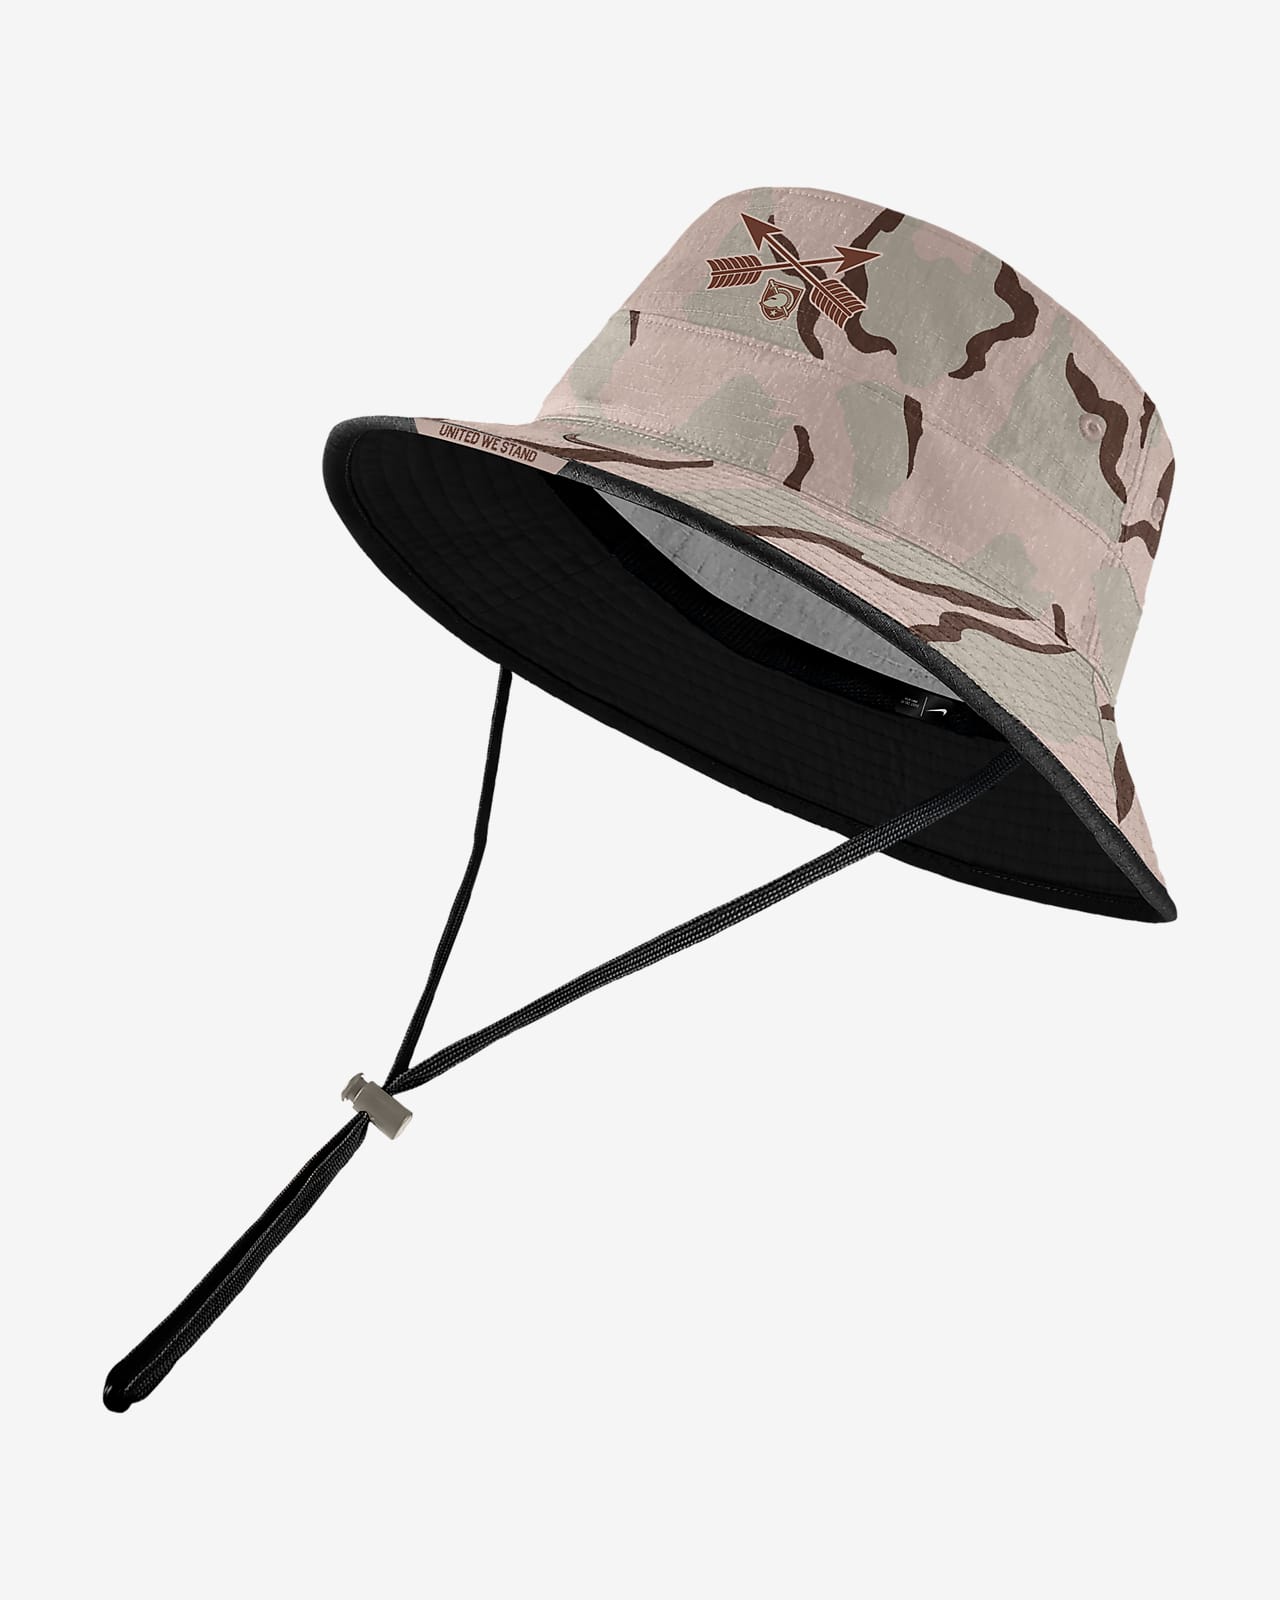 https://static.nike.com/a/images/t_PDP_1280_v1/f_auto,q_auto:eco/7252669d-9041-4be7-9633-5482fcae887f/army-camo-bucket-hat-Mp6jBc.png